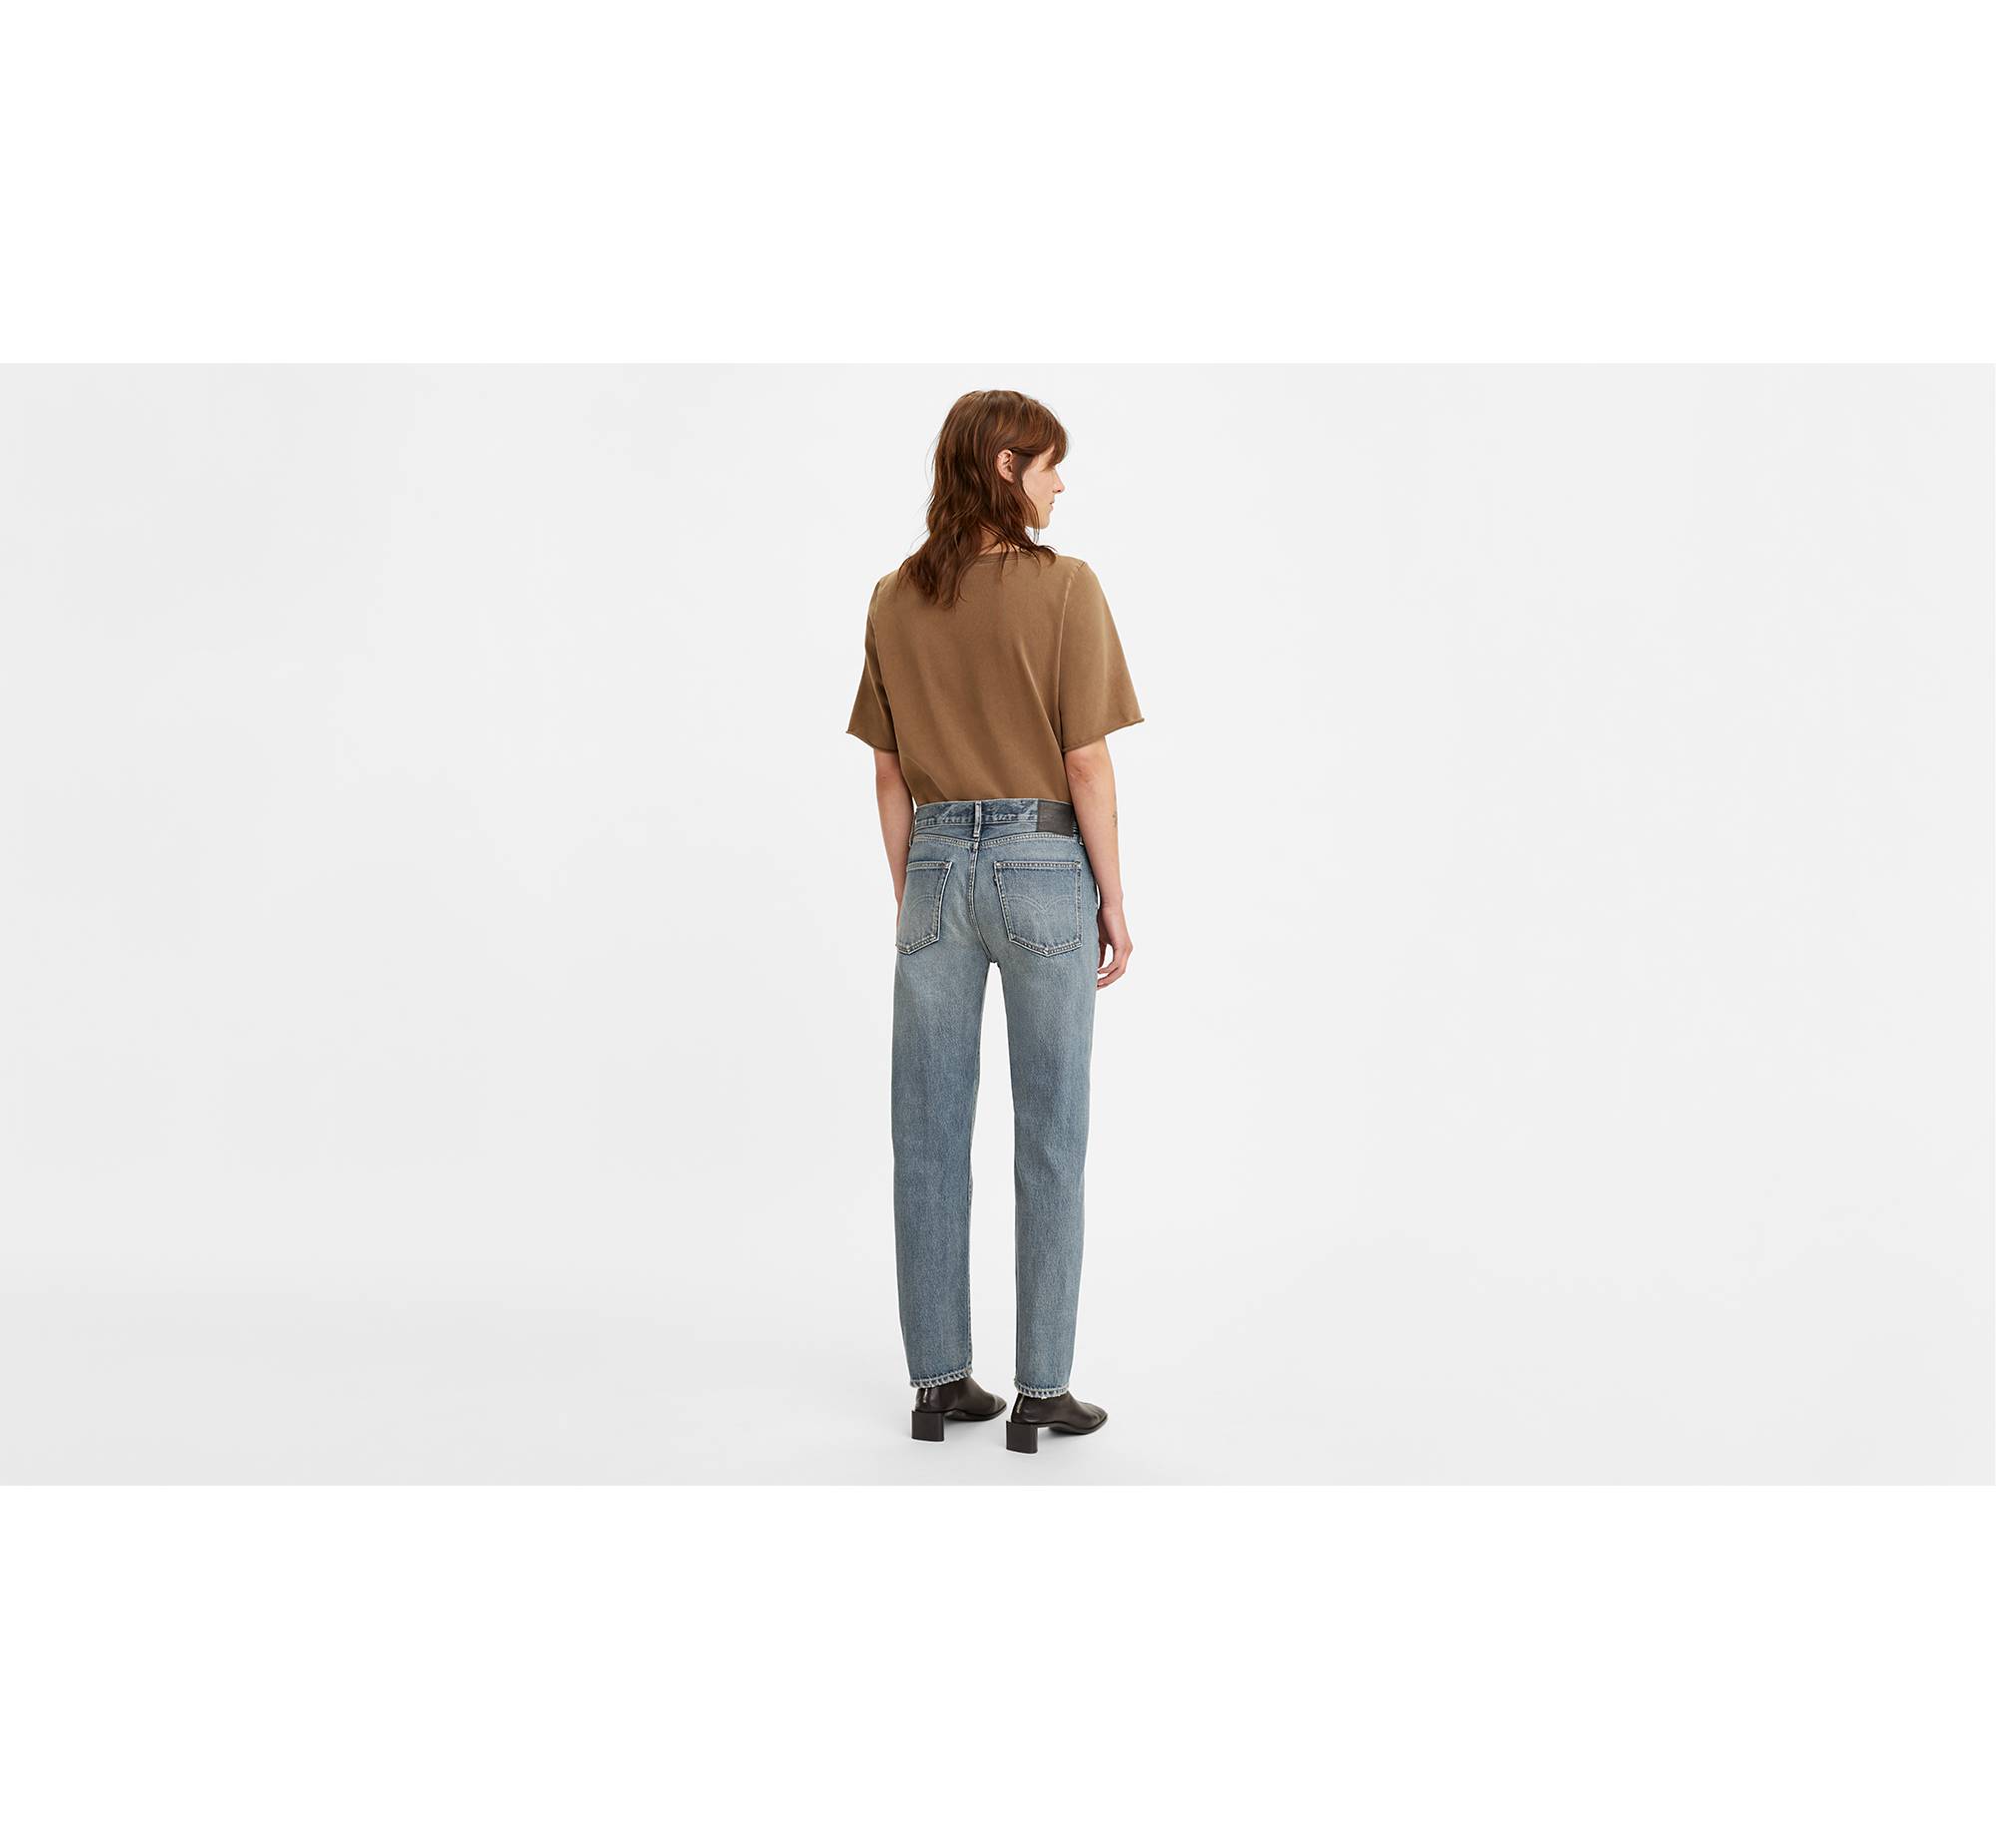 Pipe Straight Women's Jeans - Light Wash | Levi's® US